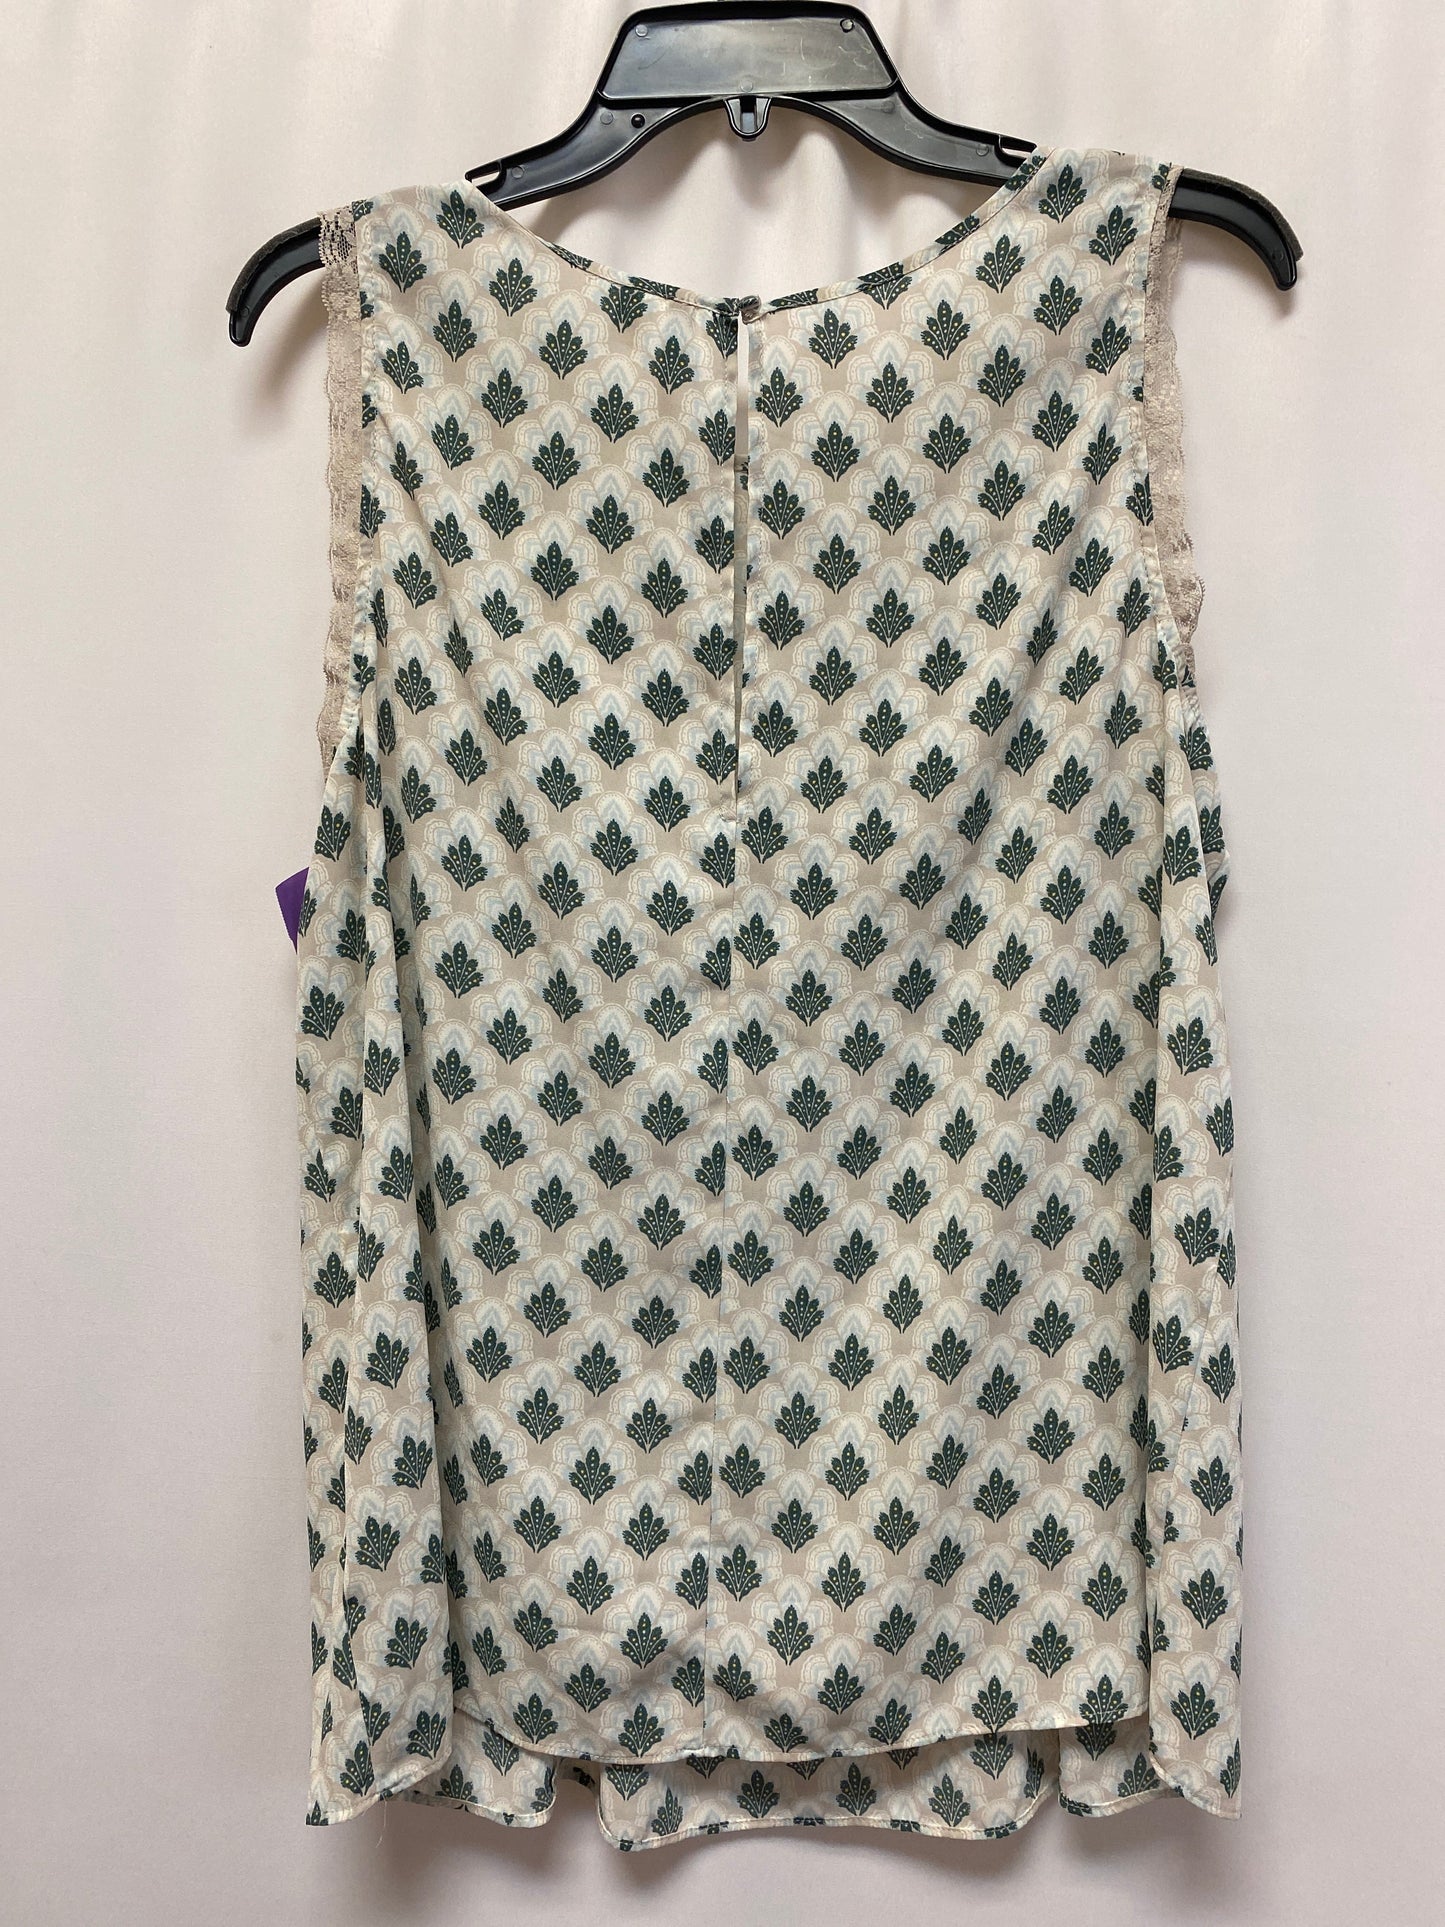 Top Sleeveless By Lc Lauren Conrad  Size: L